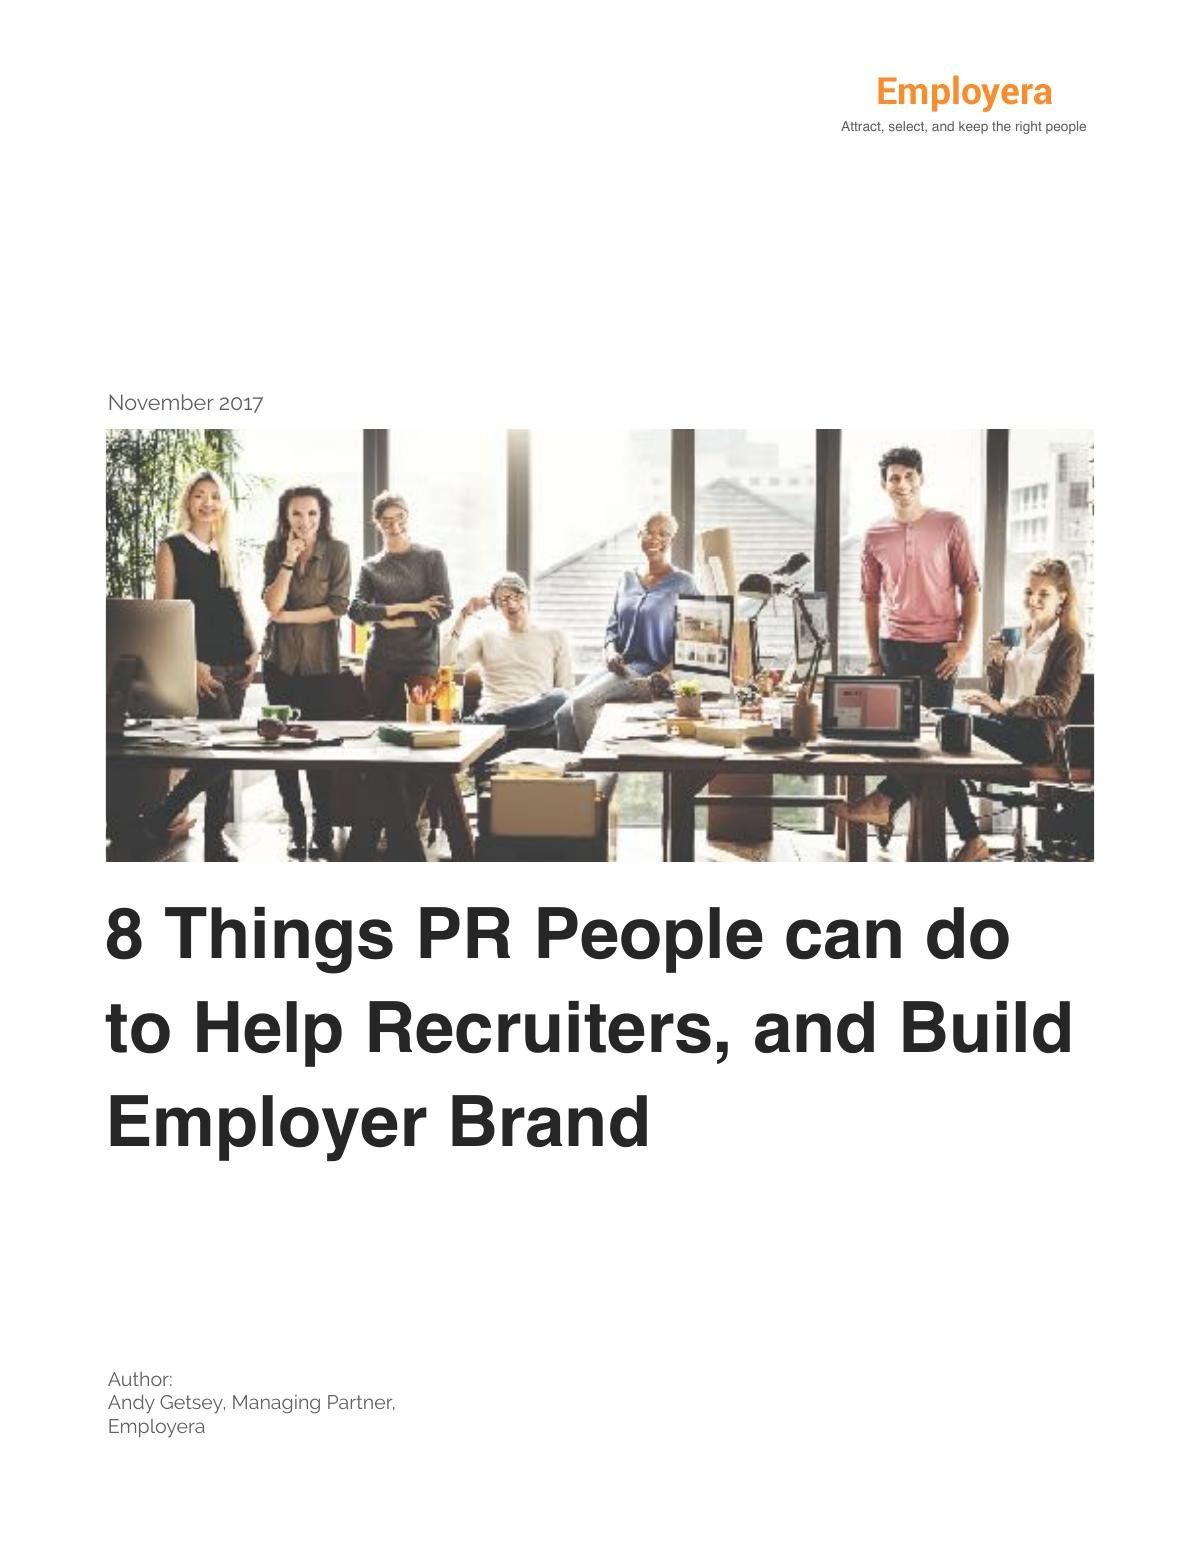 8 Ways PR People Can Help Recruiters and Build Employer Brand